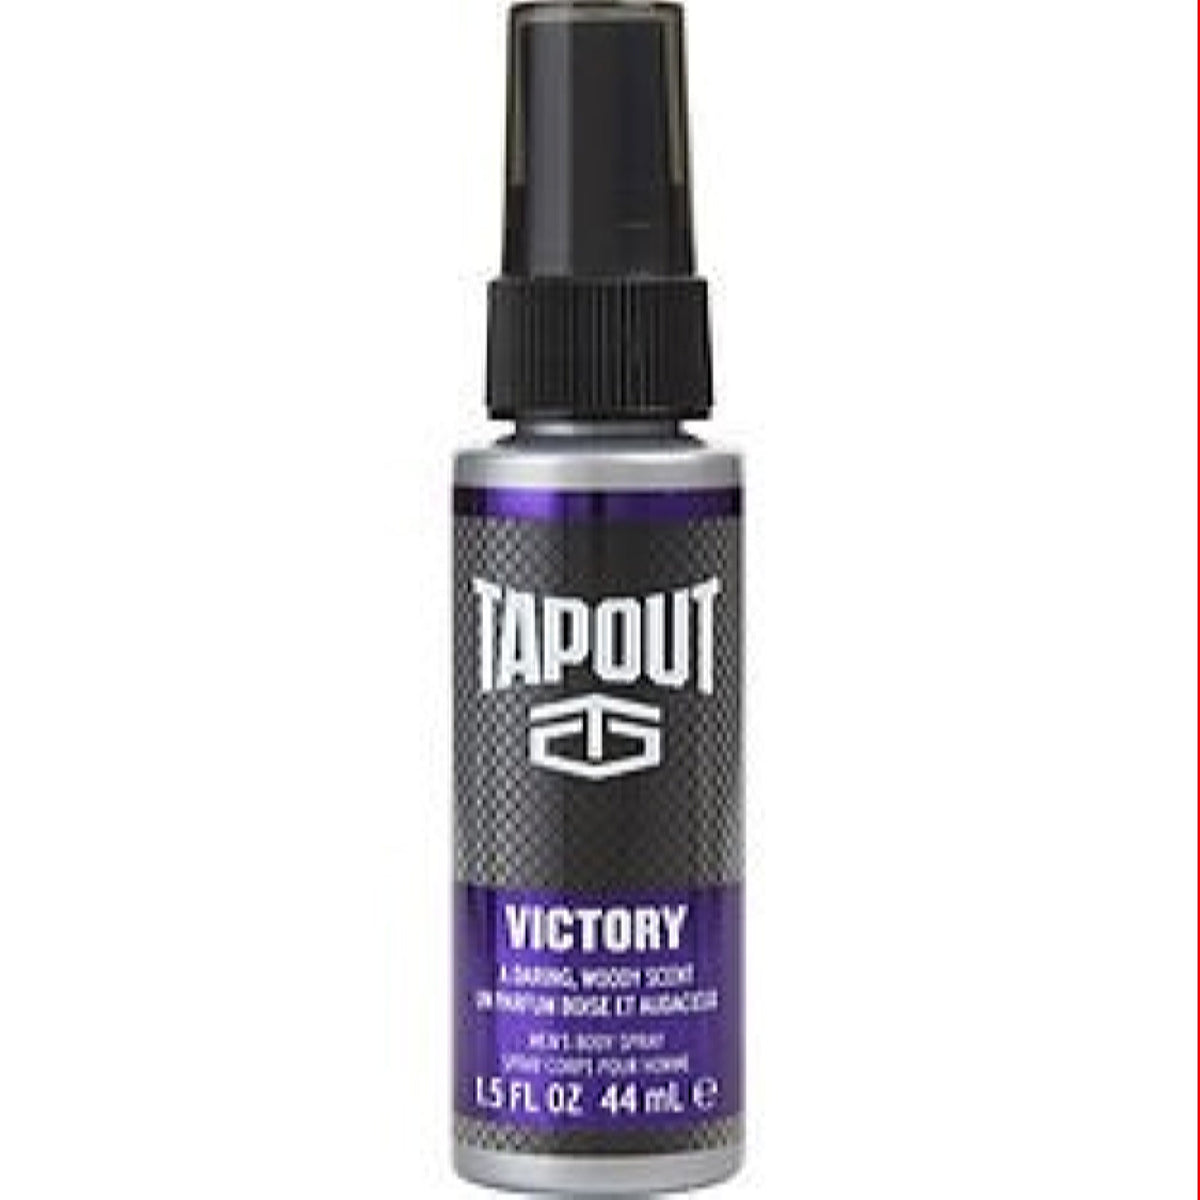 Tapout Victory Tapout Body Spray 1.5 Oz (45 Ml) For Men A0110079